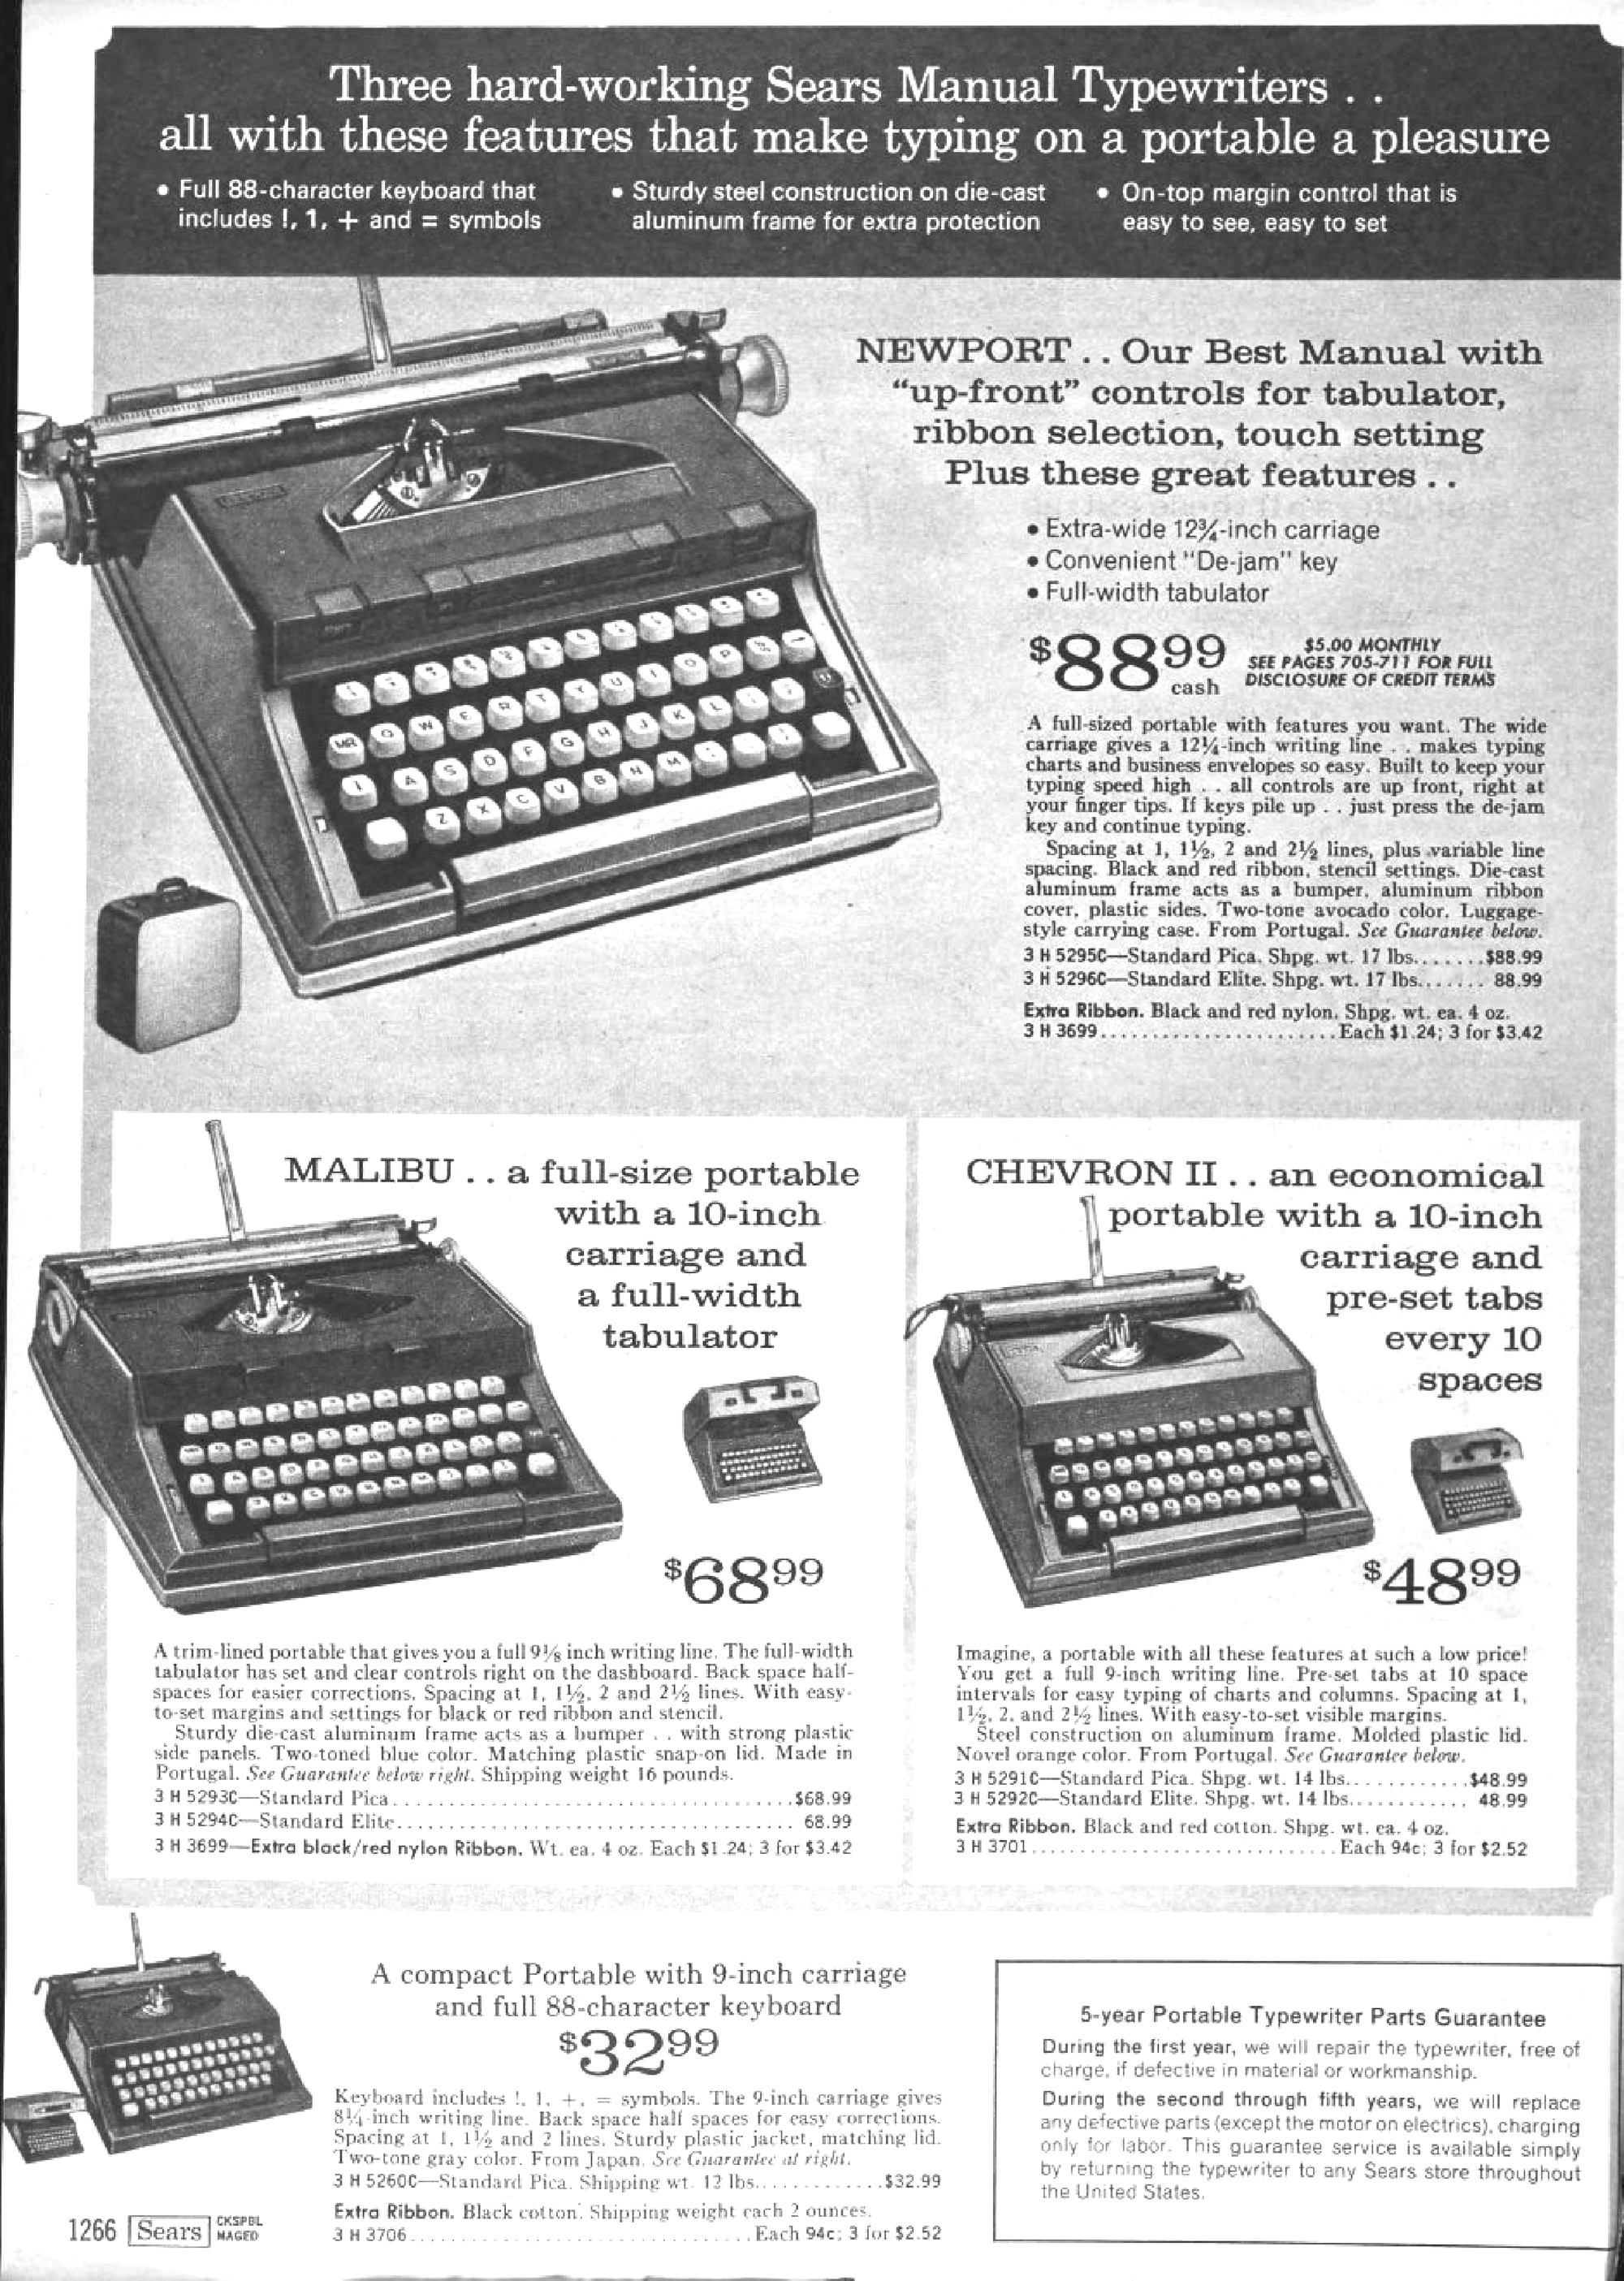 Sears Typewriter Serial Number Page Created! – To Type, Shoot Straight ...